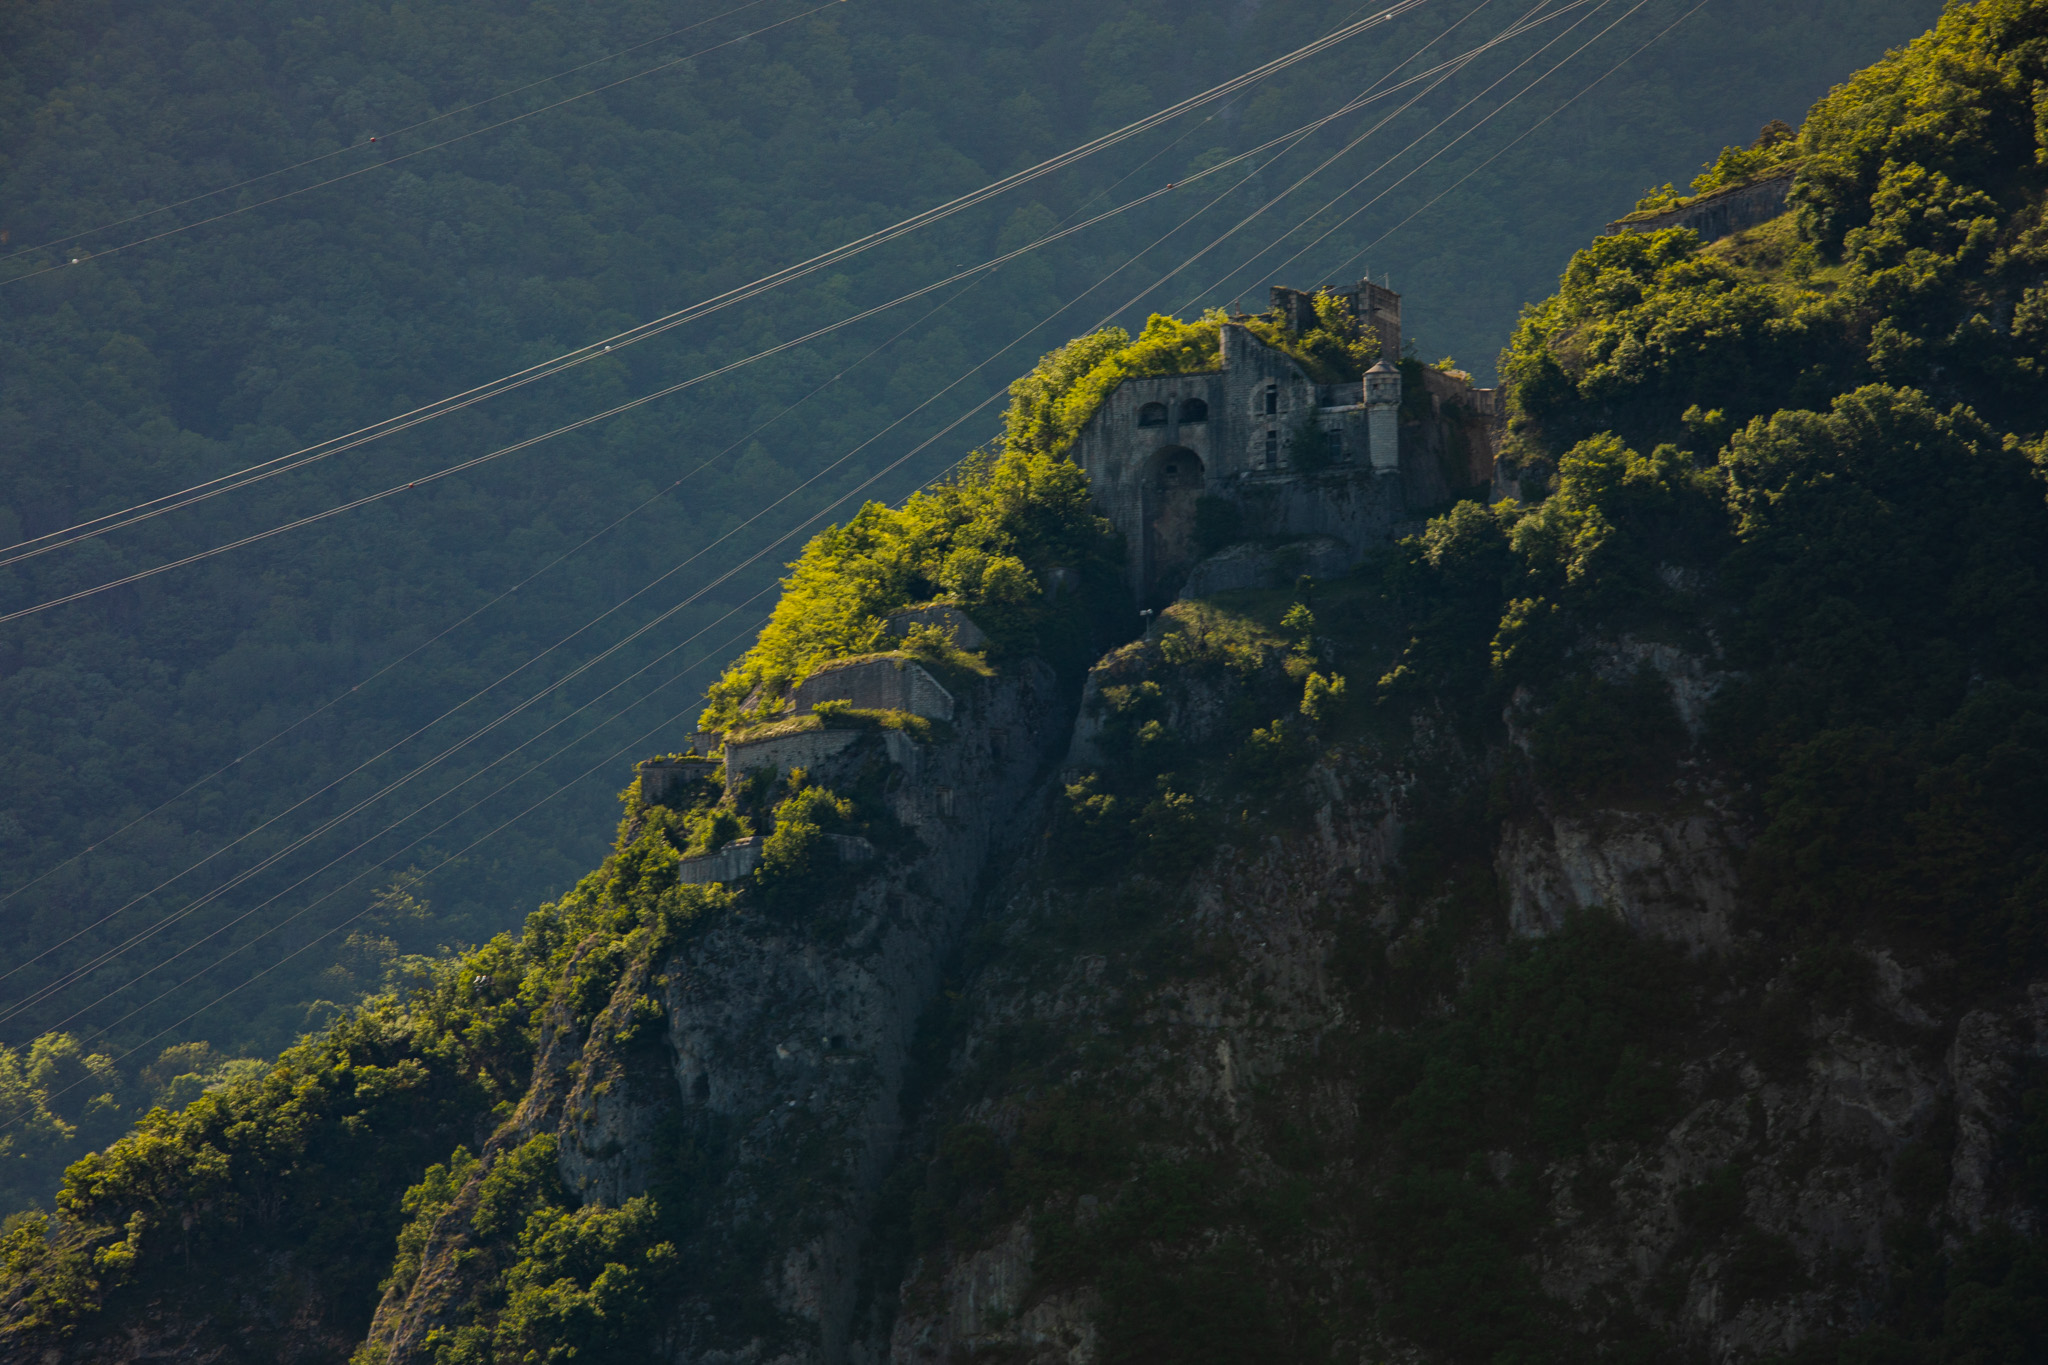 General 2048x1365 photography outdoors nature greenery mountains castle cliff landscape trees history ruins France